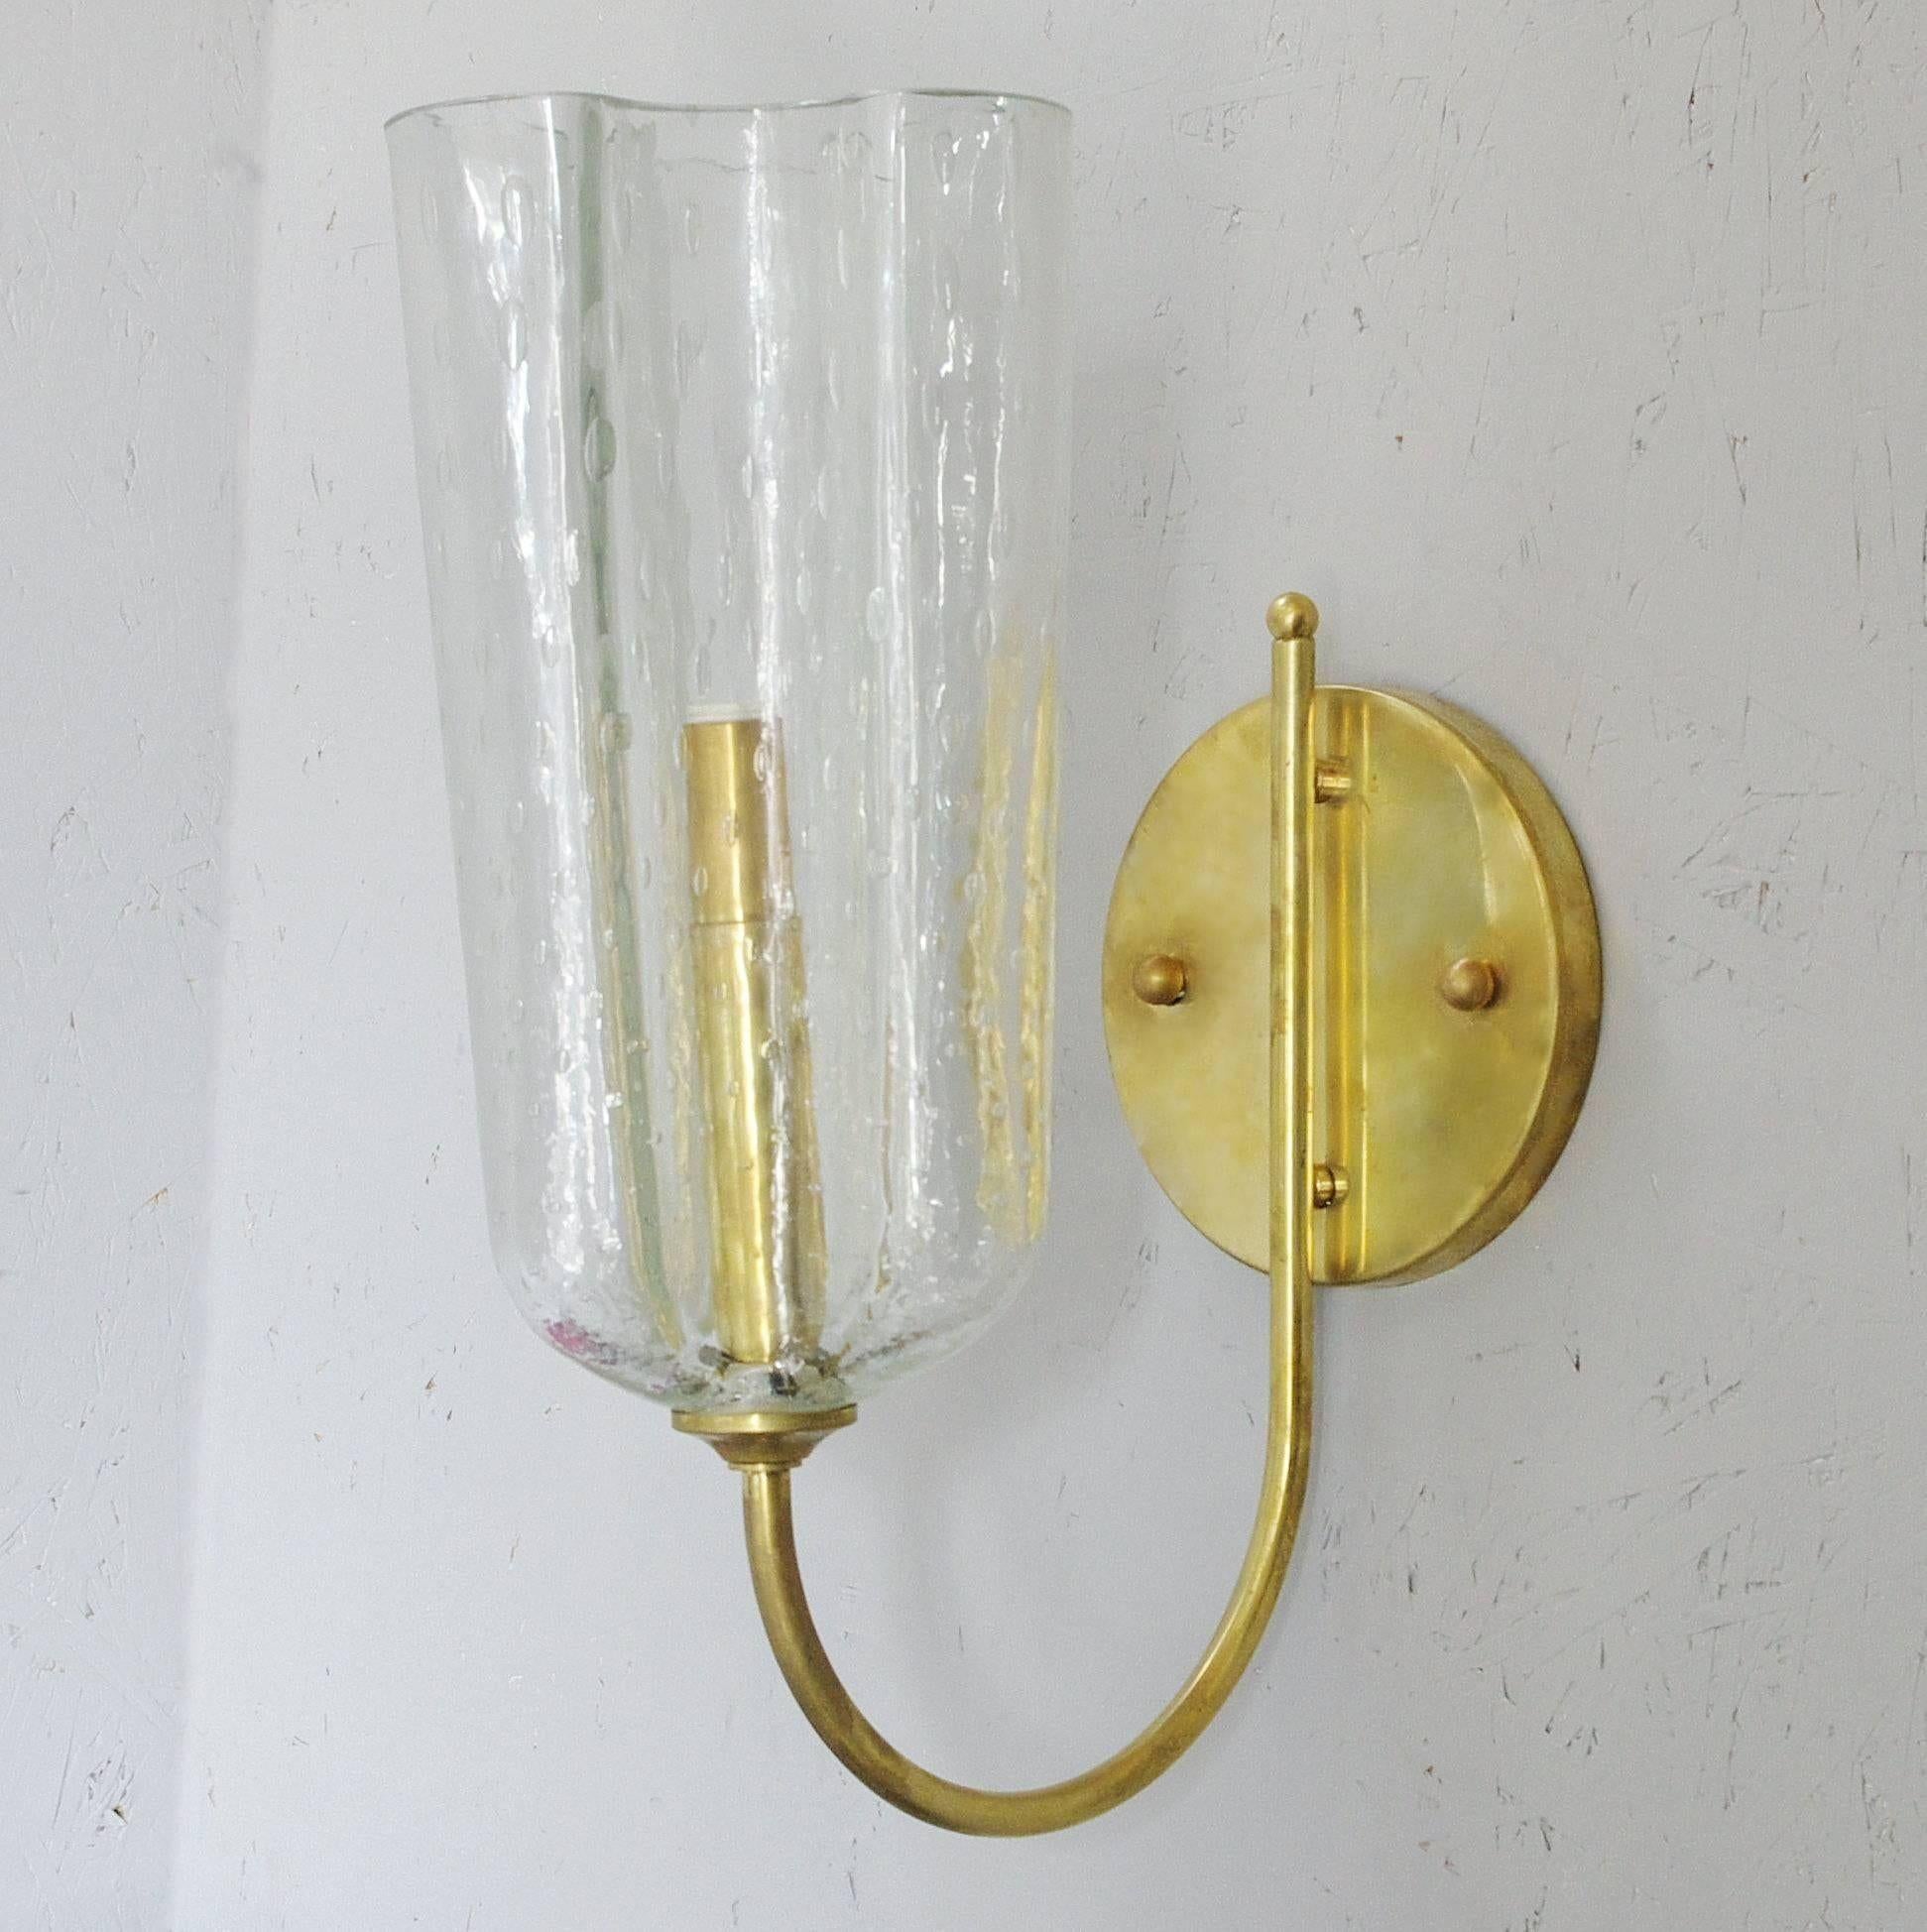 Set of six vintage Italian wall sconces with clear Murano hand blown glass with bubbles within the glass in Pulegoso technique, mounted on brass hardware. Made in Italy, circa 1960s.
Dimensions:
 
Measures: 19